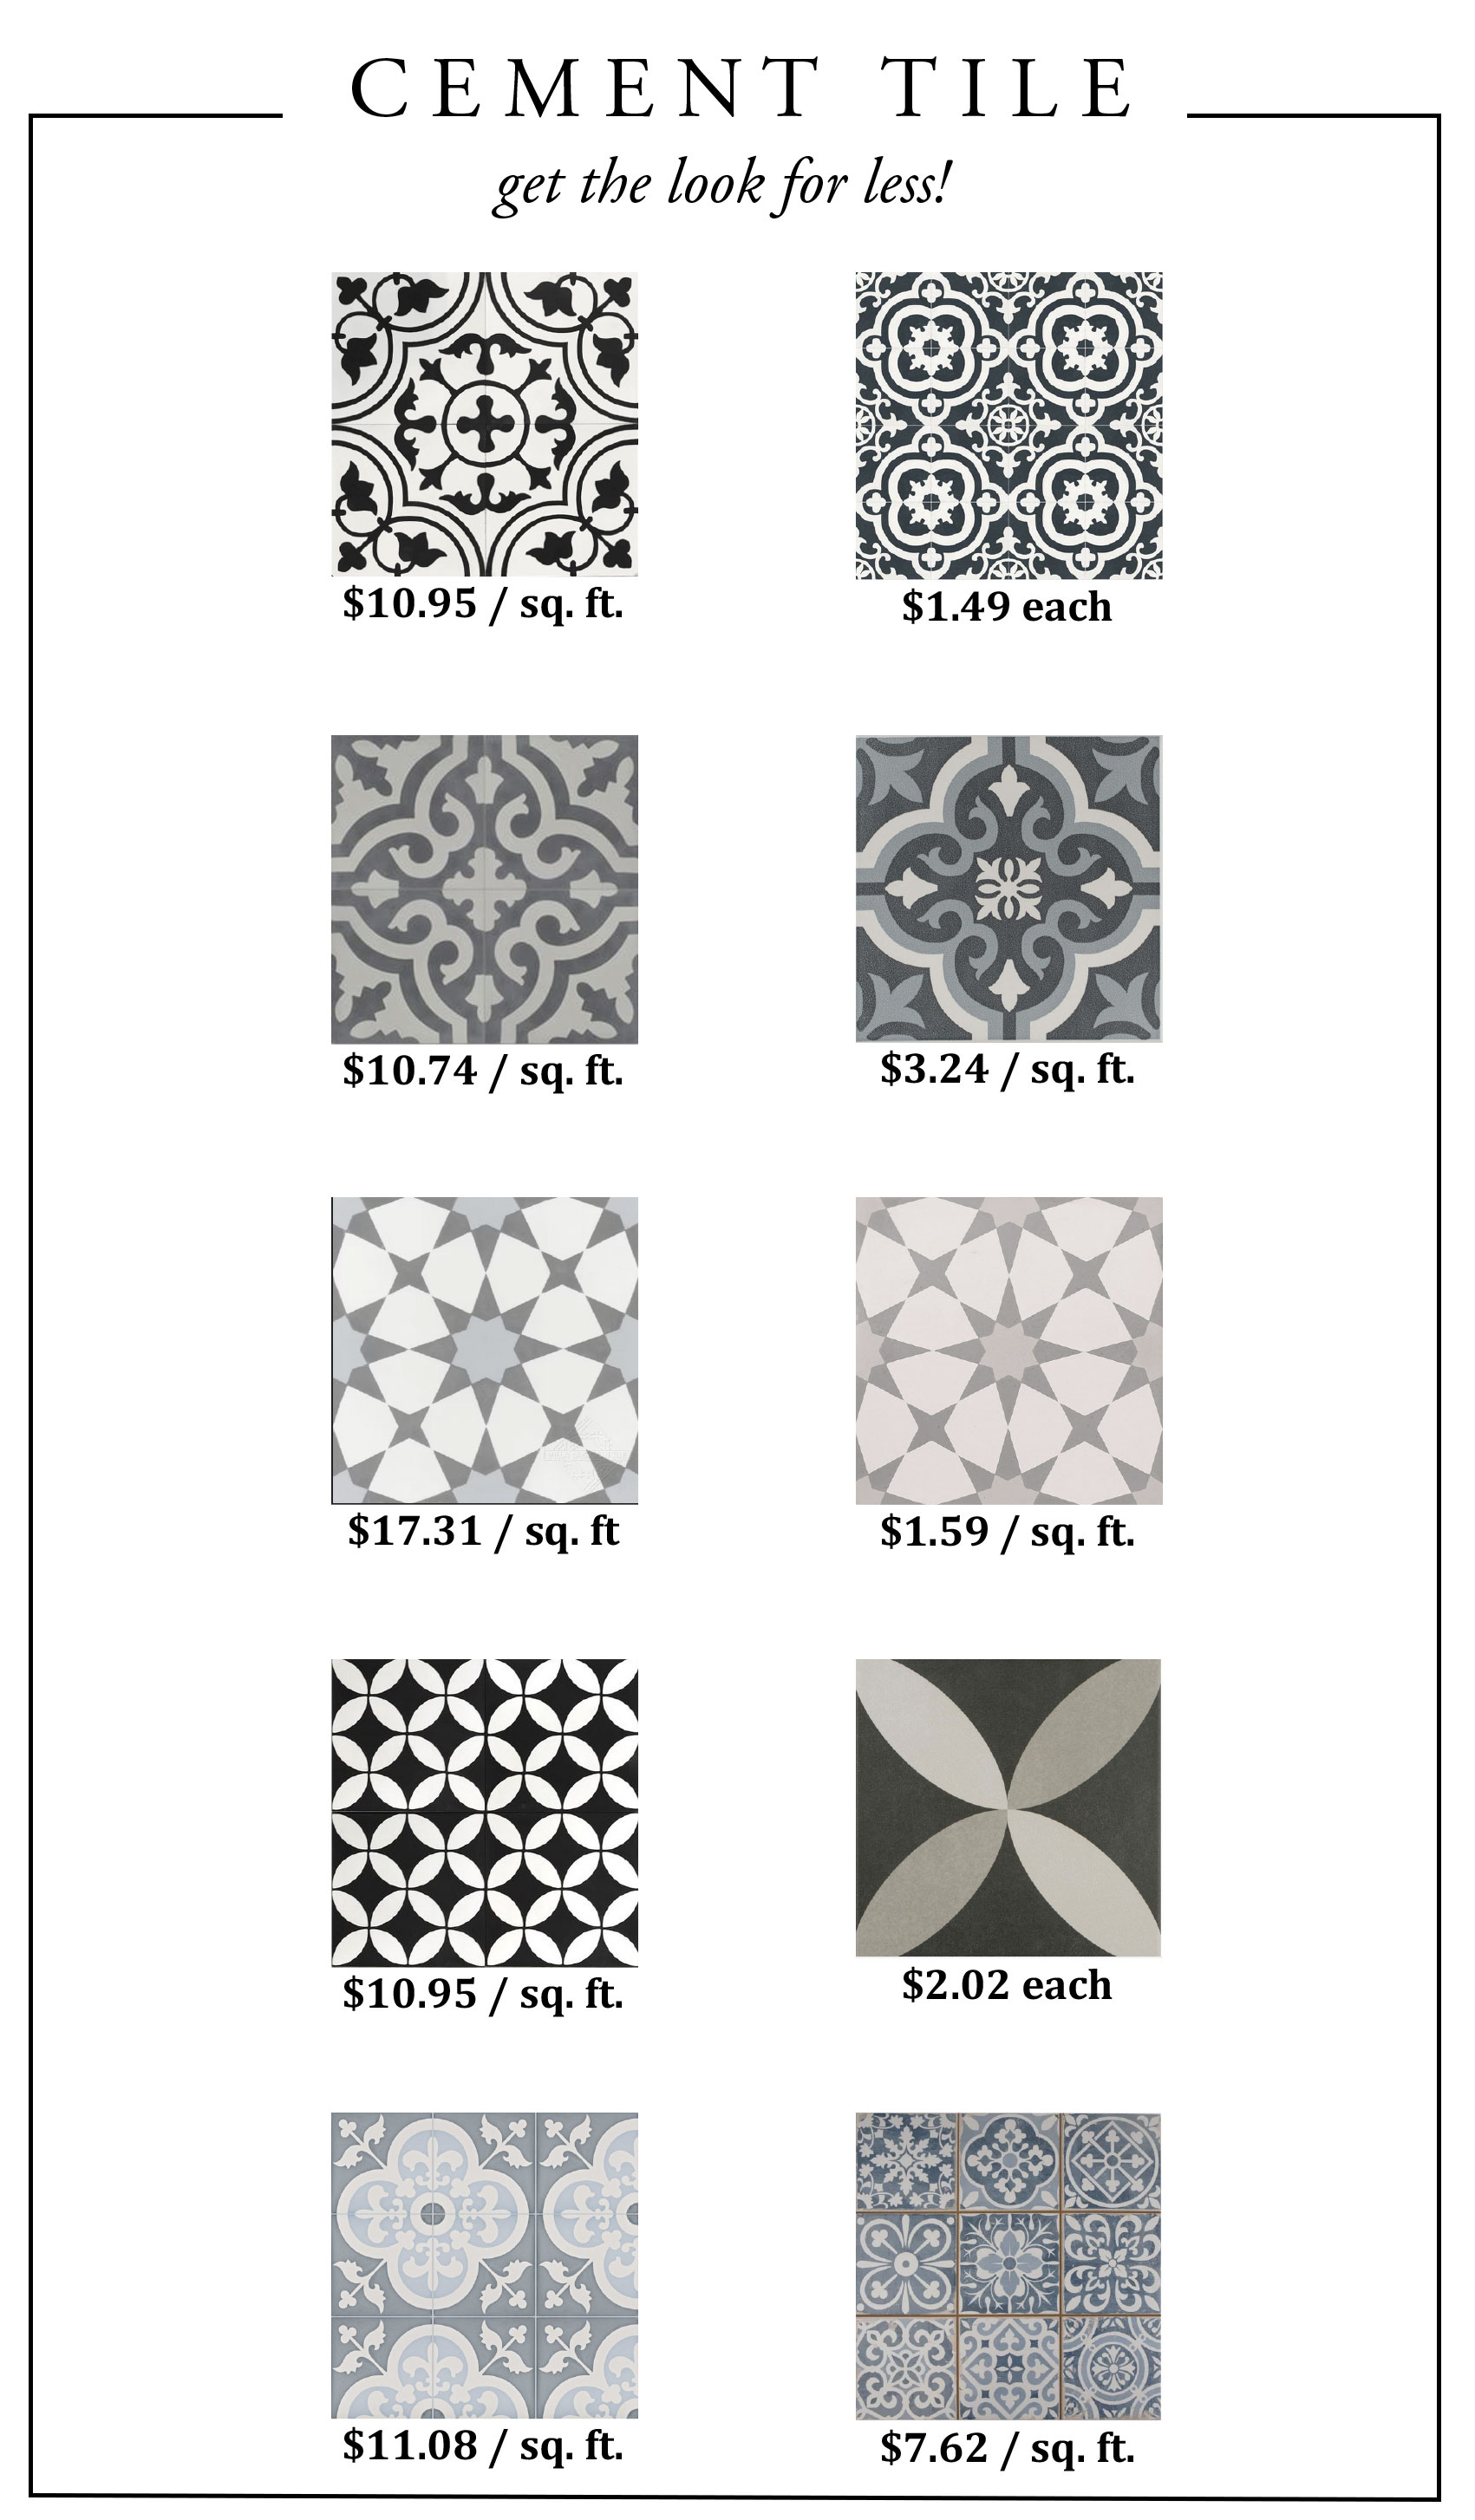 High End Cement Tiles For Less The, Tiles For Less